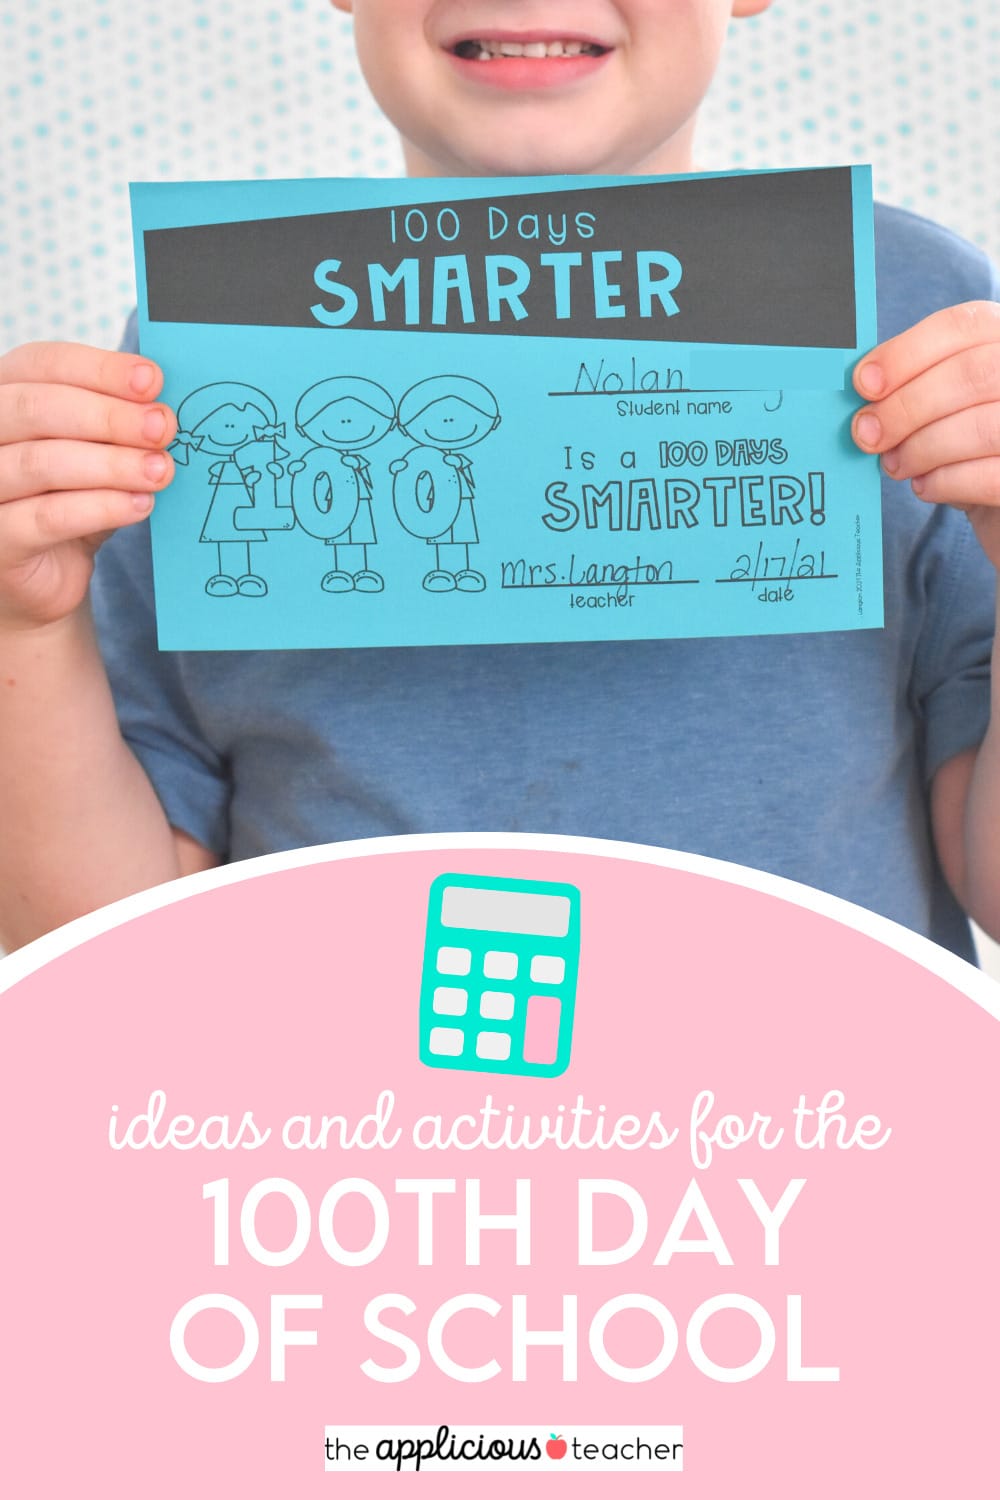 11 Ways to Celebrate the 100th Day of School in 2nd Grade